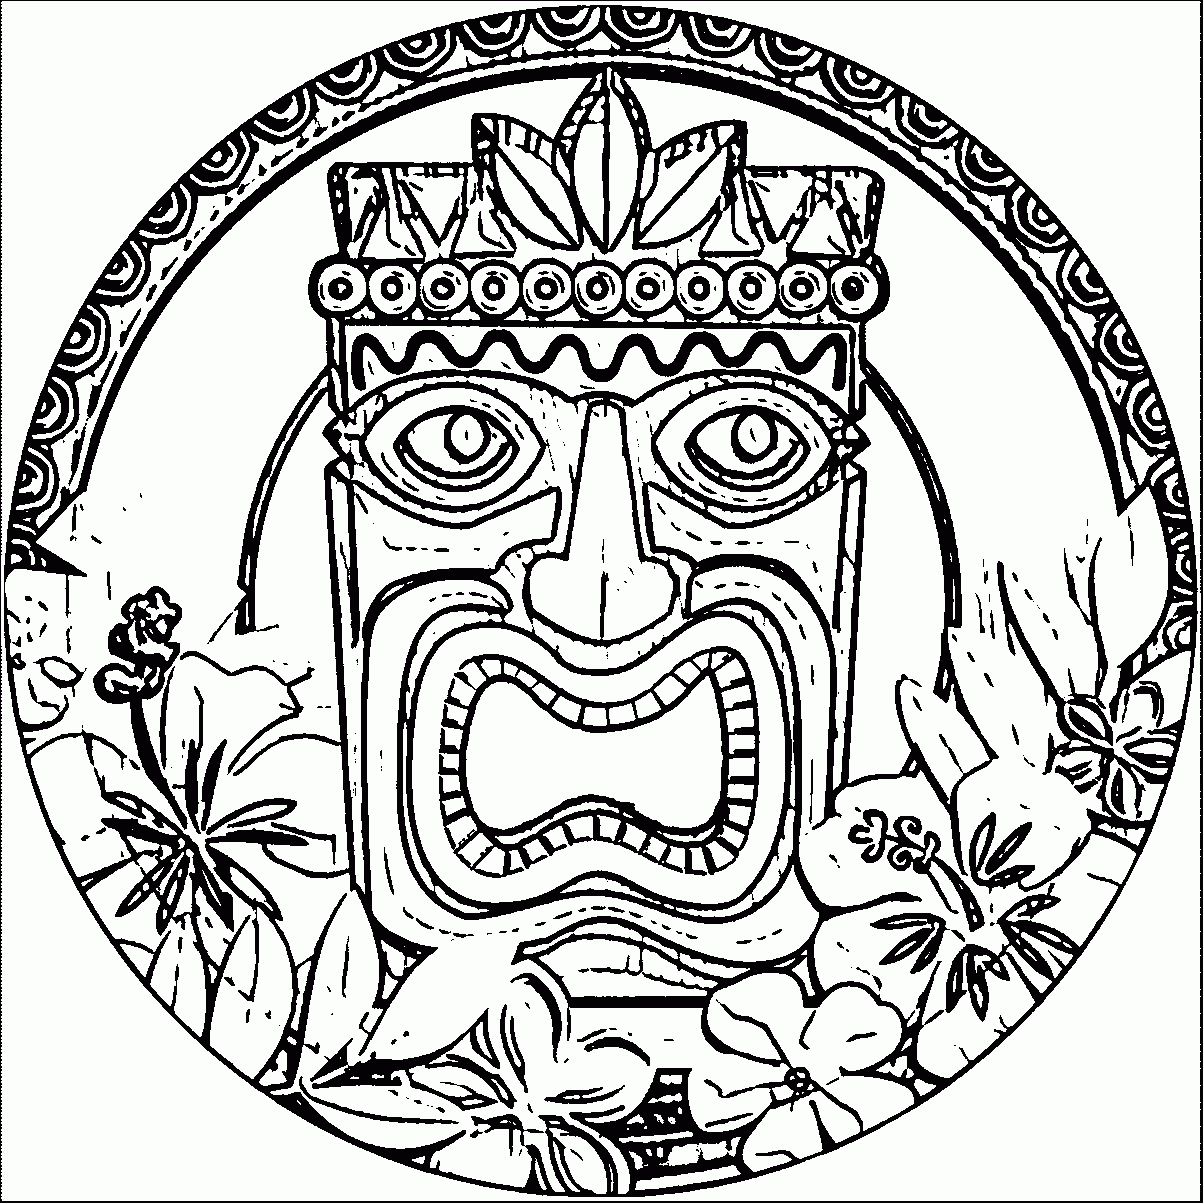 Tiki Coloring Page - Coloring Pages For Kids And For Adults - Tiki Coloring Pages Free Printables